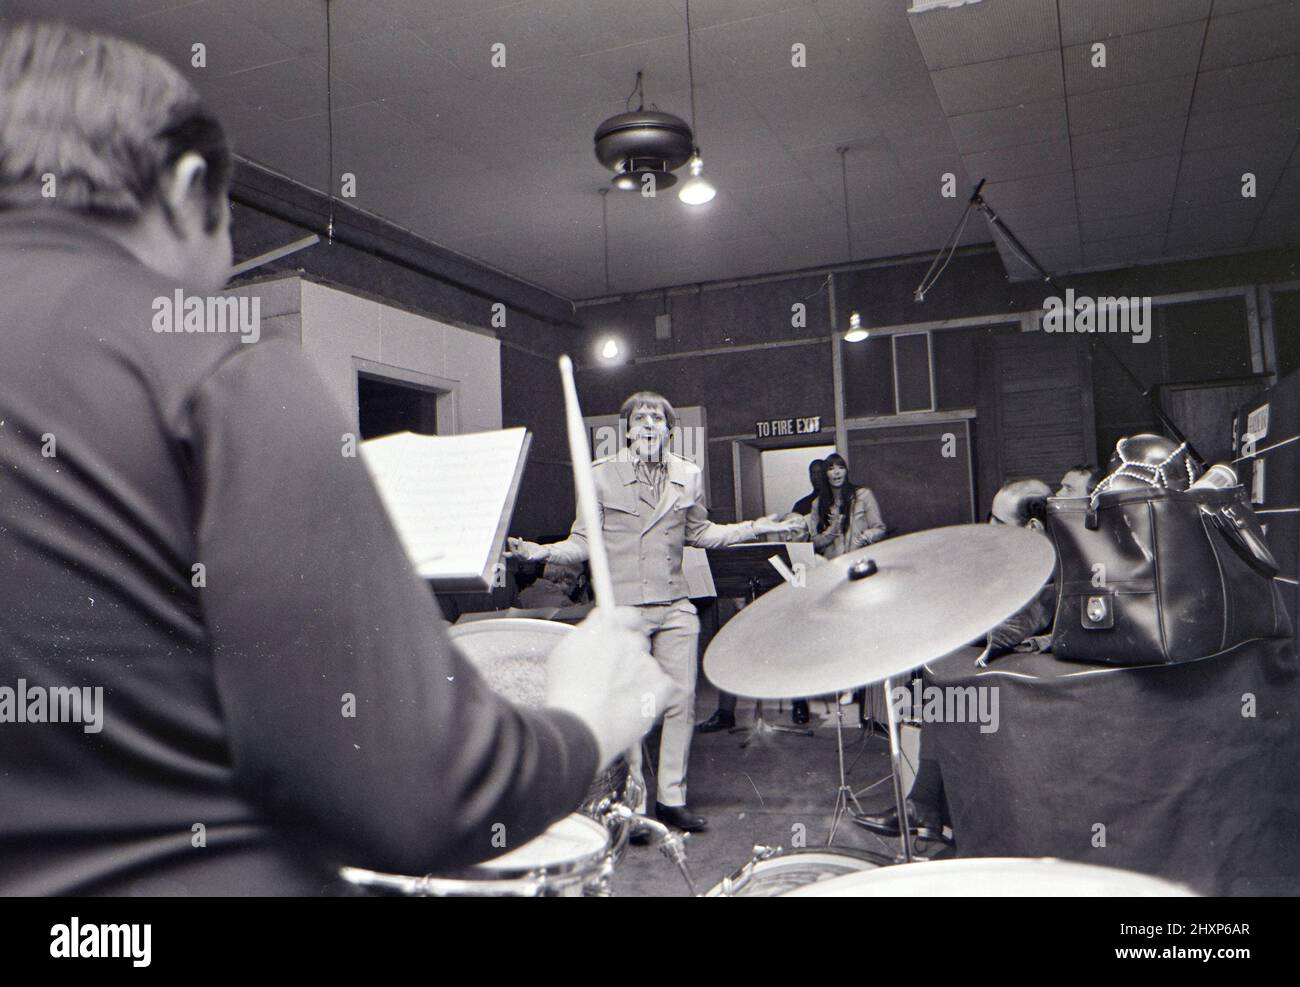 SONNY AND CHER Sonny Bono in a London recording studio in August 1966/ His  partner Cher can be seen in some images with a tambourine Stock Photo -  Alamy